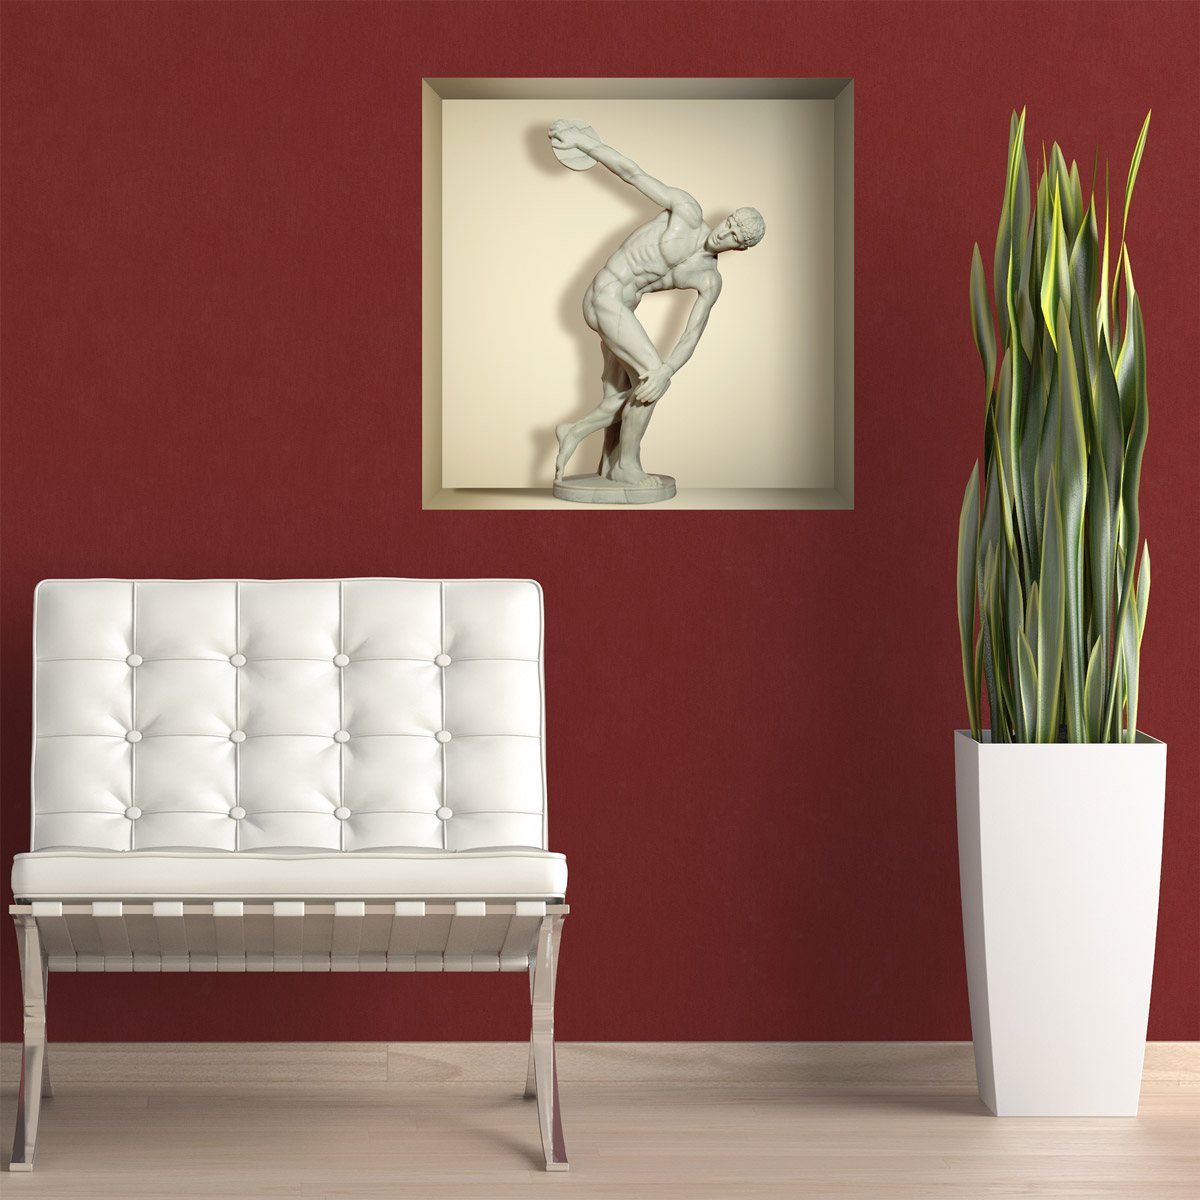 Wall Stickers: Discus Thrower of Myron niche